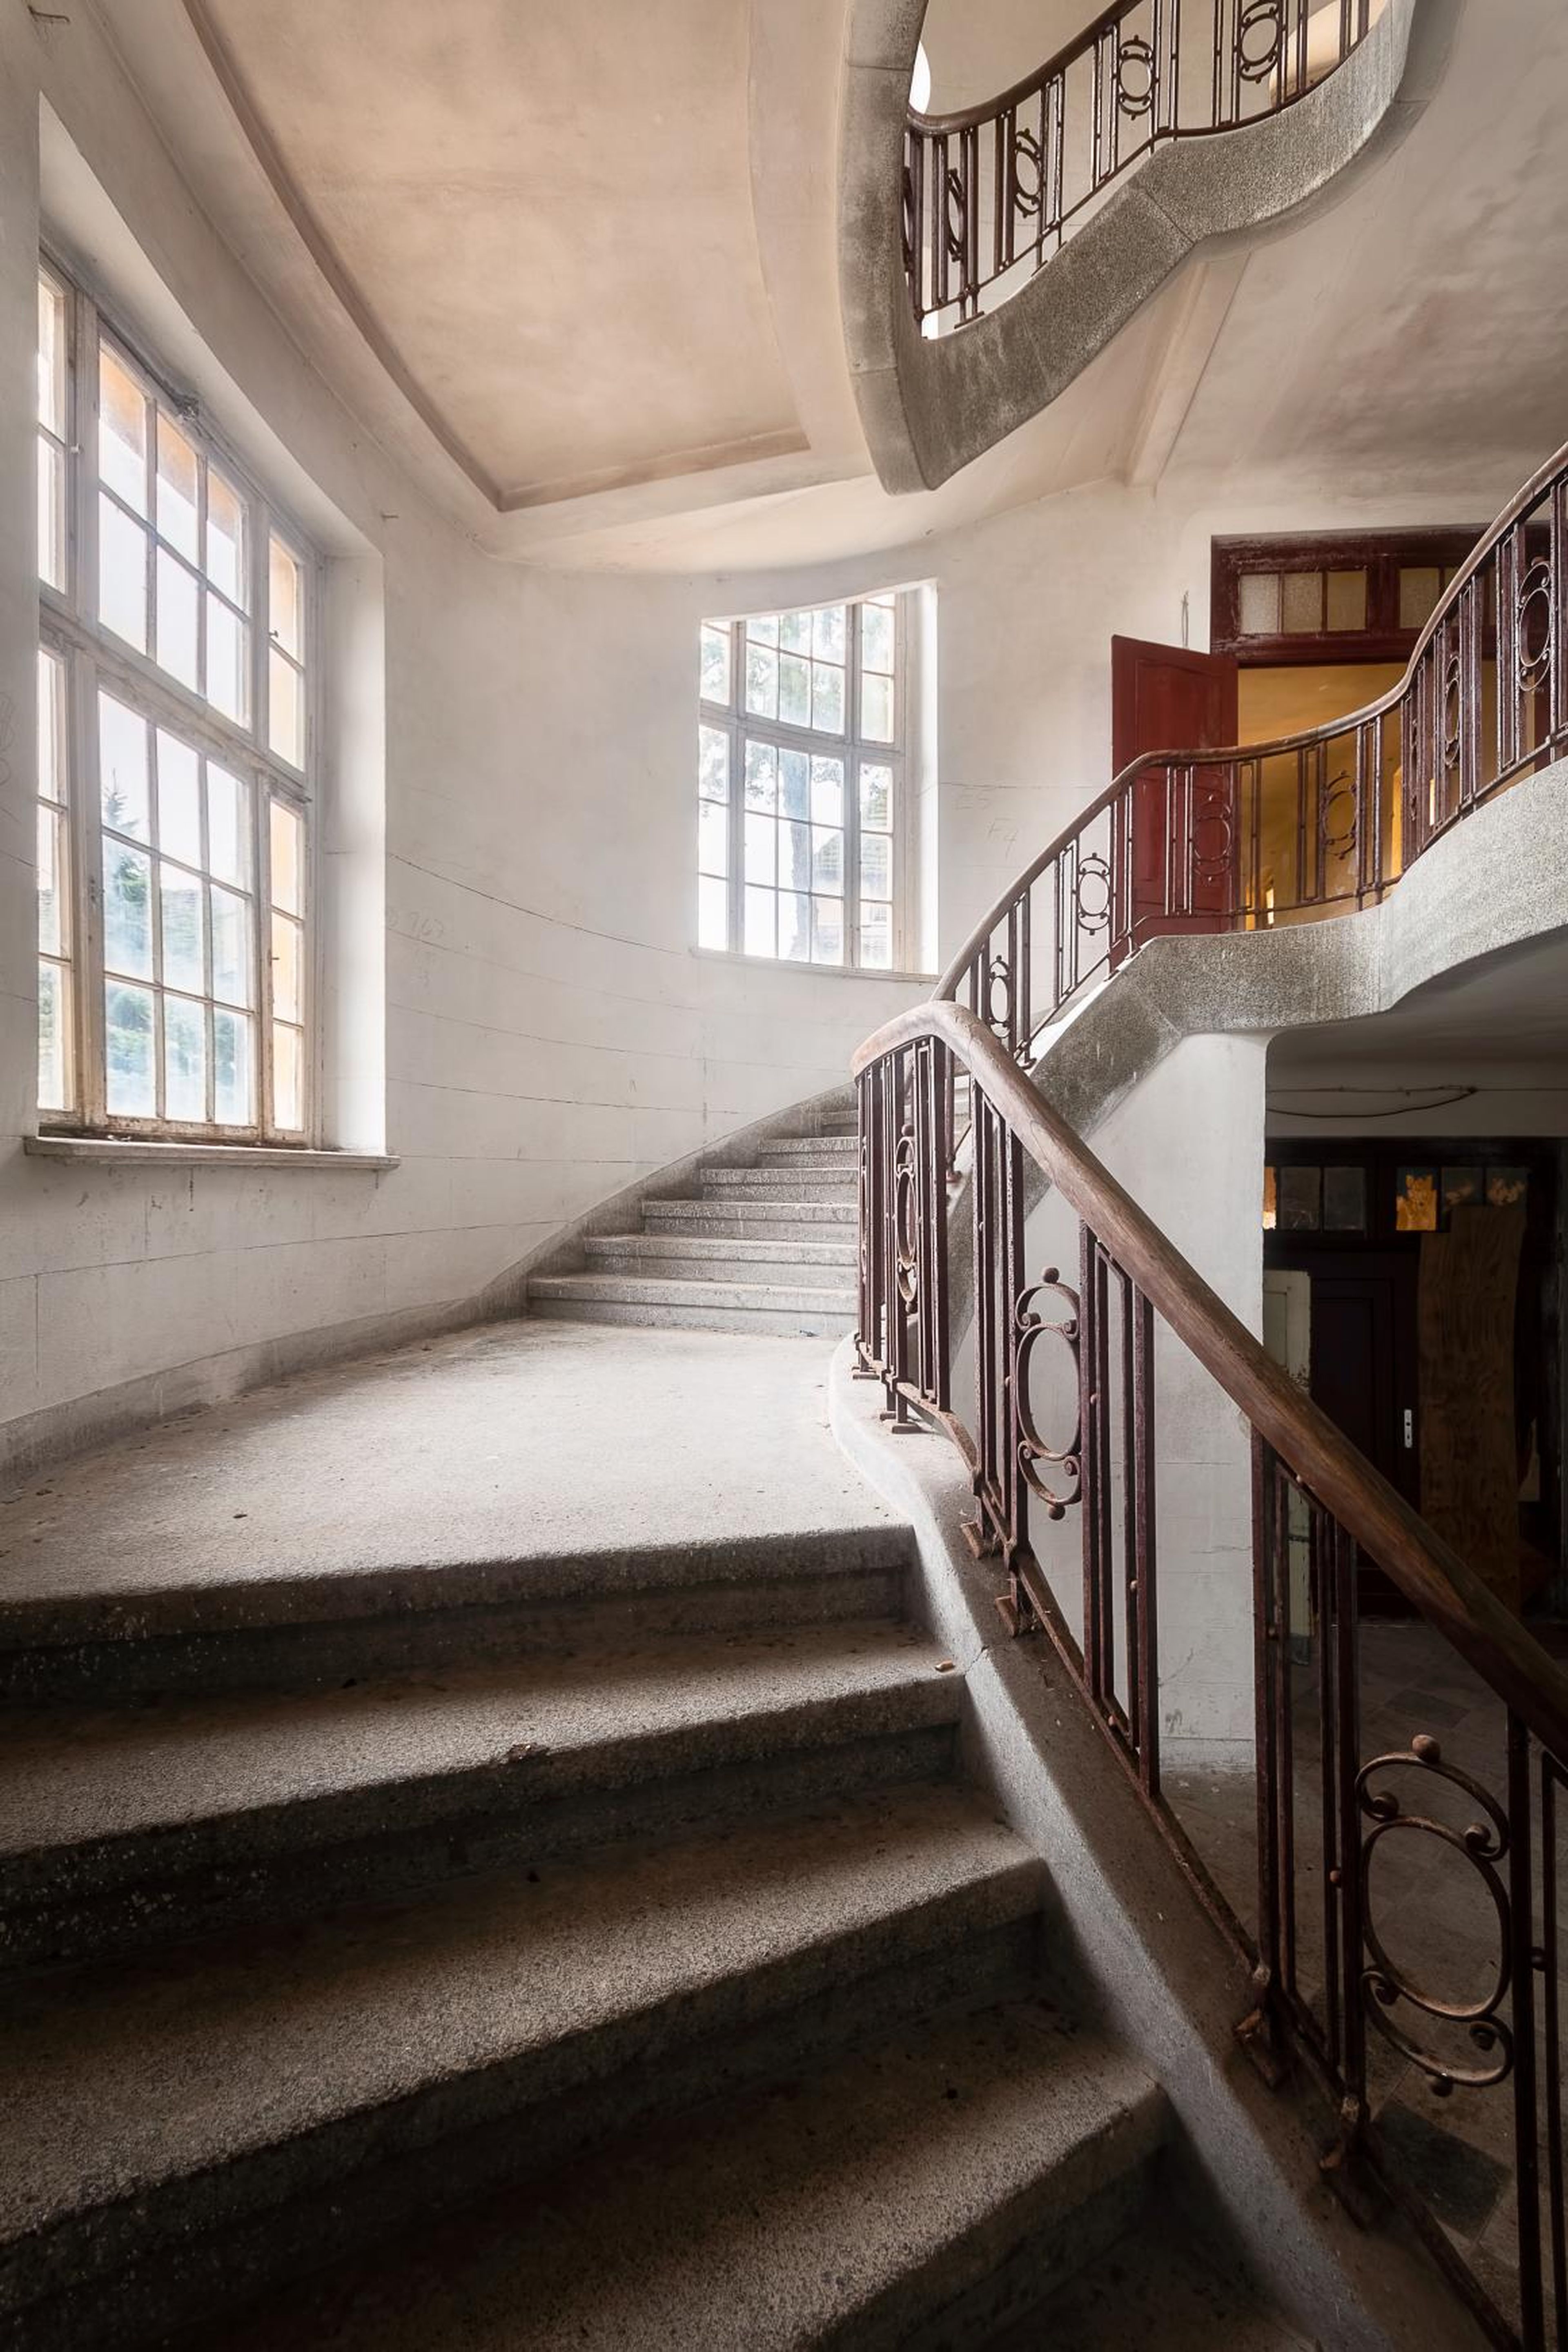 This grand staircase leads to the upper floor of the main building of the base.